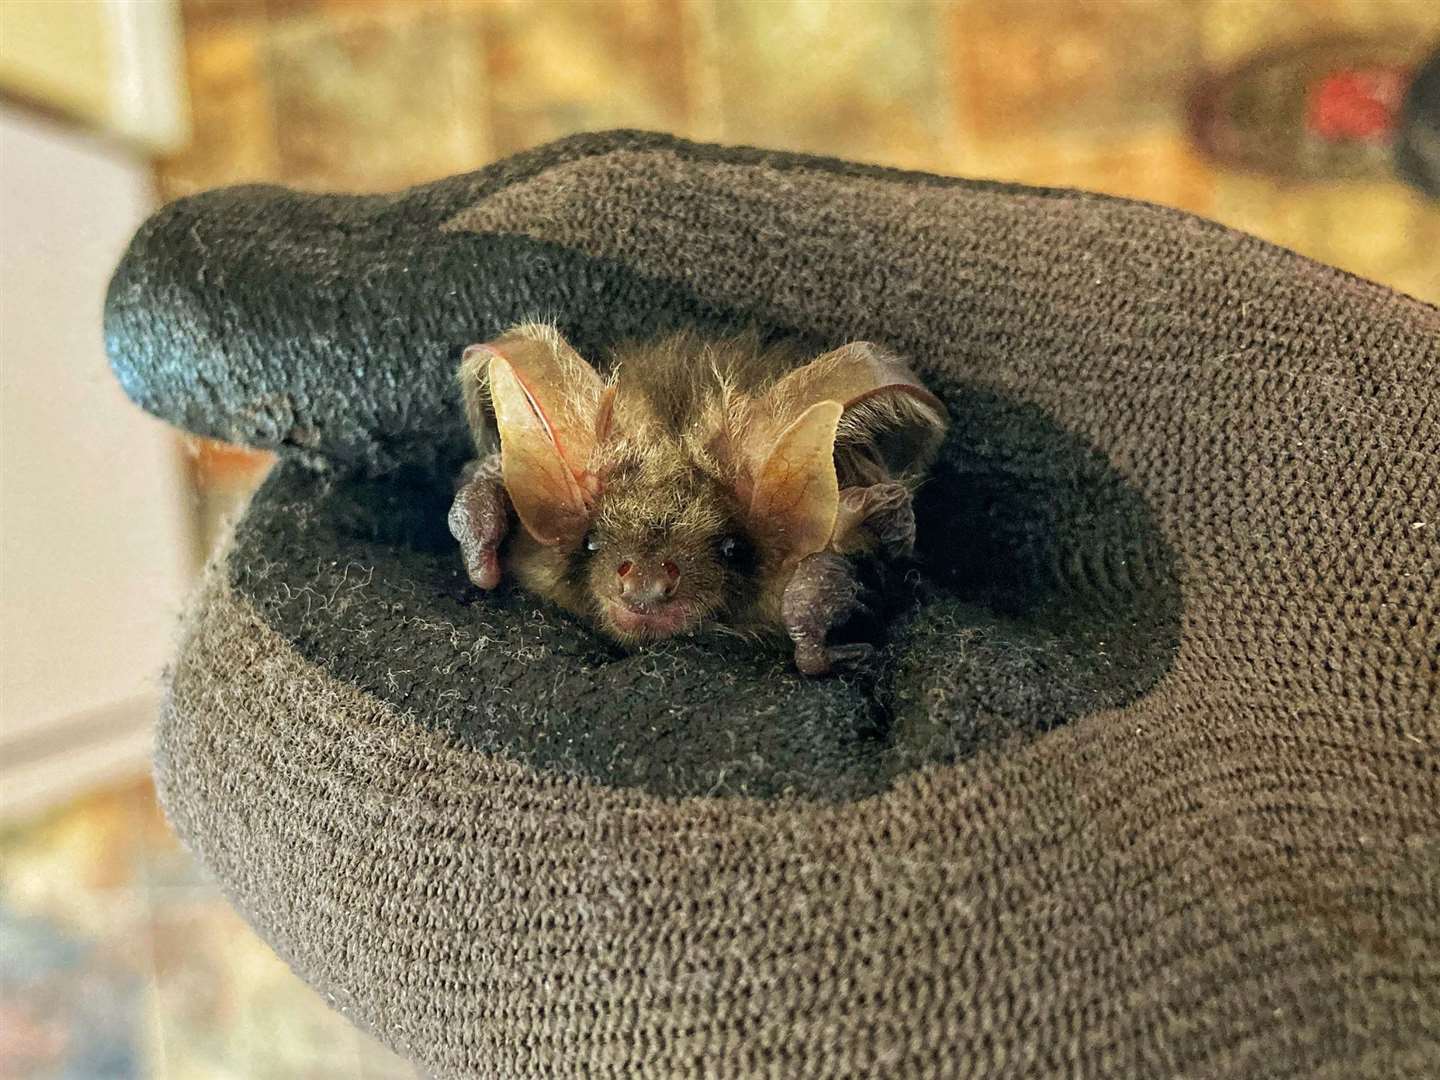 A brown long-eared bat rescued at Wallington, Northumberland, during the heatwave (National Trust Images/PA)